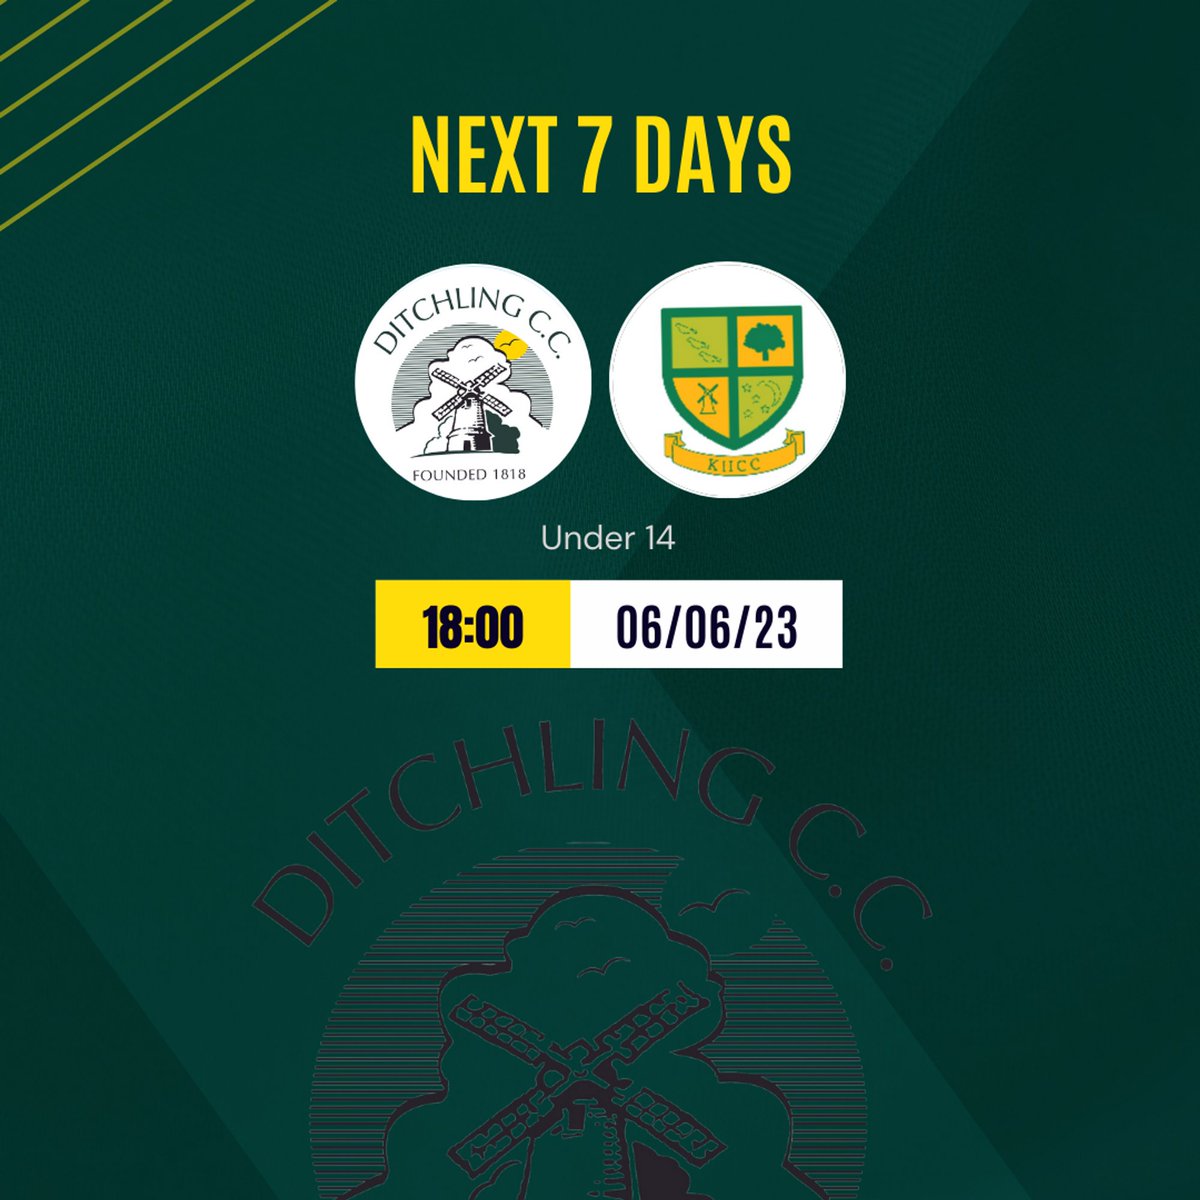 5 home games are happening at the club over the next 7 days, come along to support and watch our teams!! ☀️🏏🍻🥂

📍Ditchling Recreation Ground, Lewes Road, Ditchling, East Sussex, BN6 8TY

#ditchling #thisweeksgames #ditchlingcricket #sussexcricket